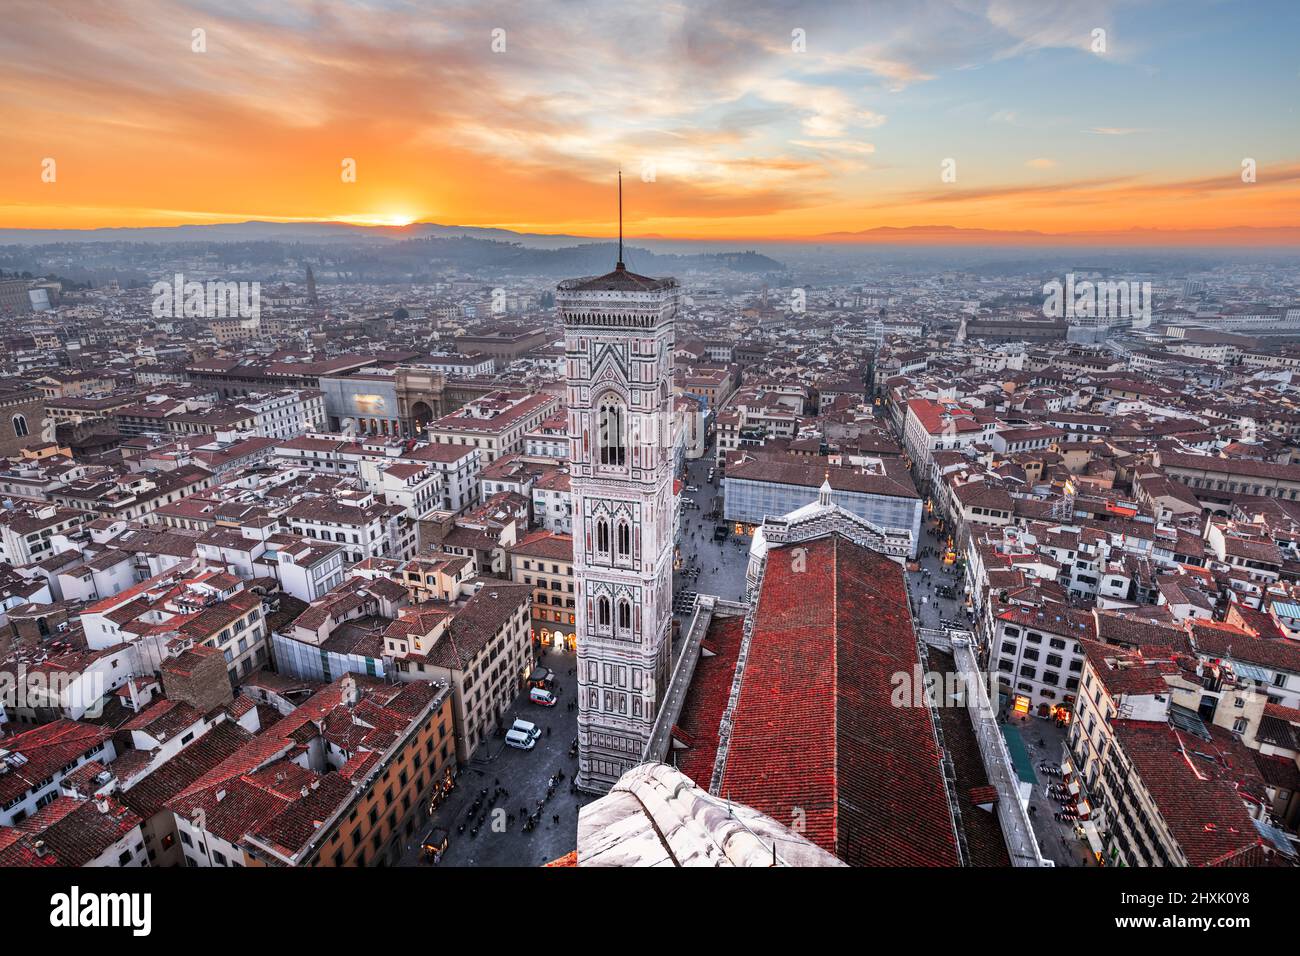 Giottos Bell Tower in Florence, Italy from above at dusk. Stock Photo